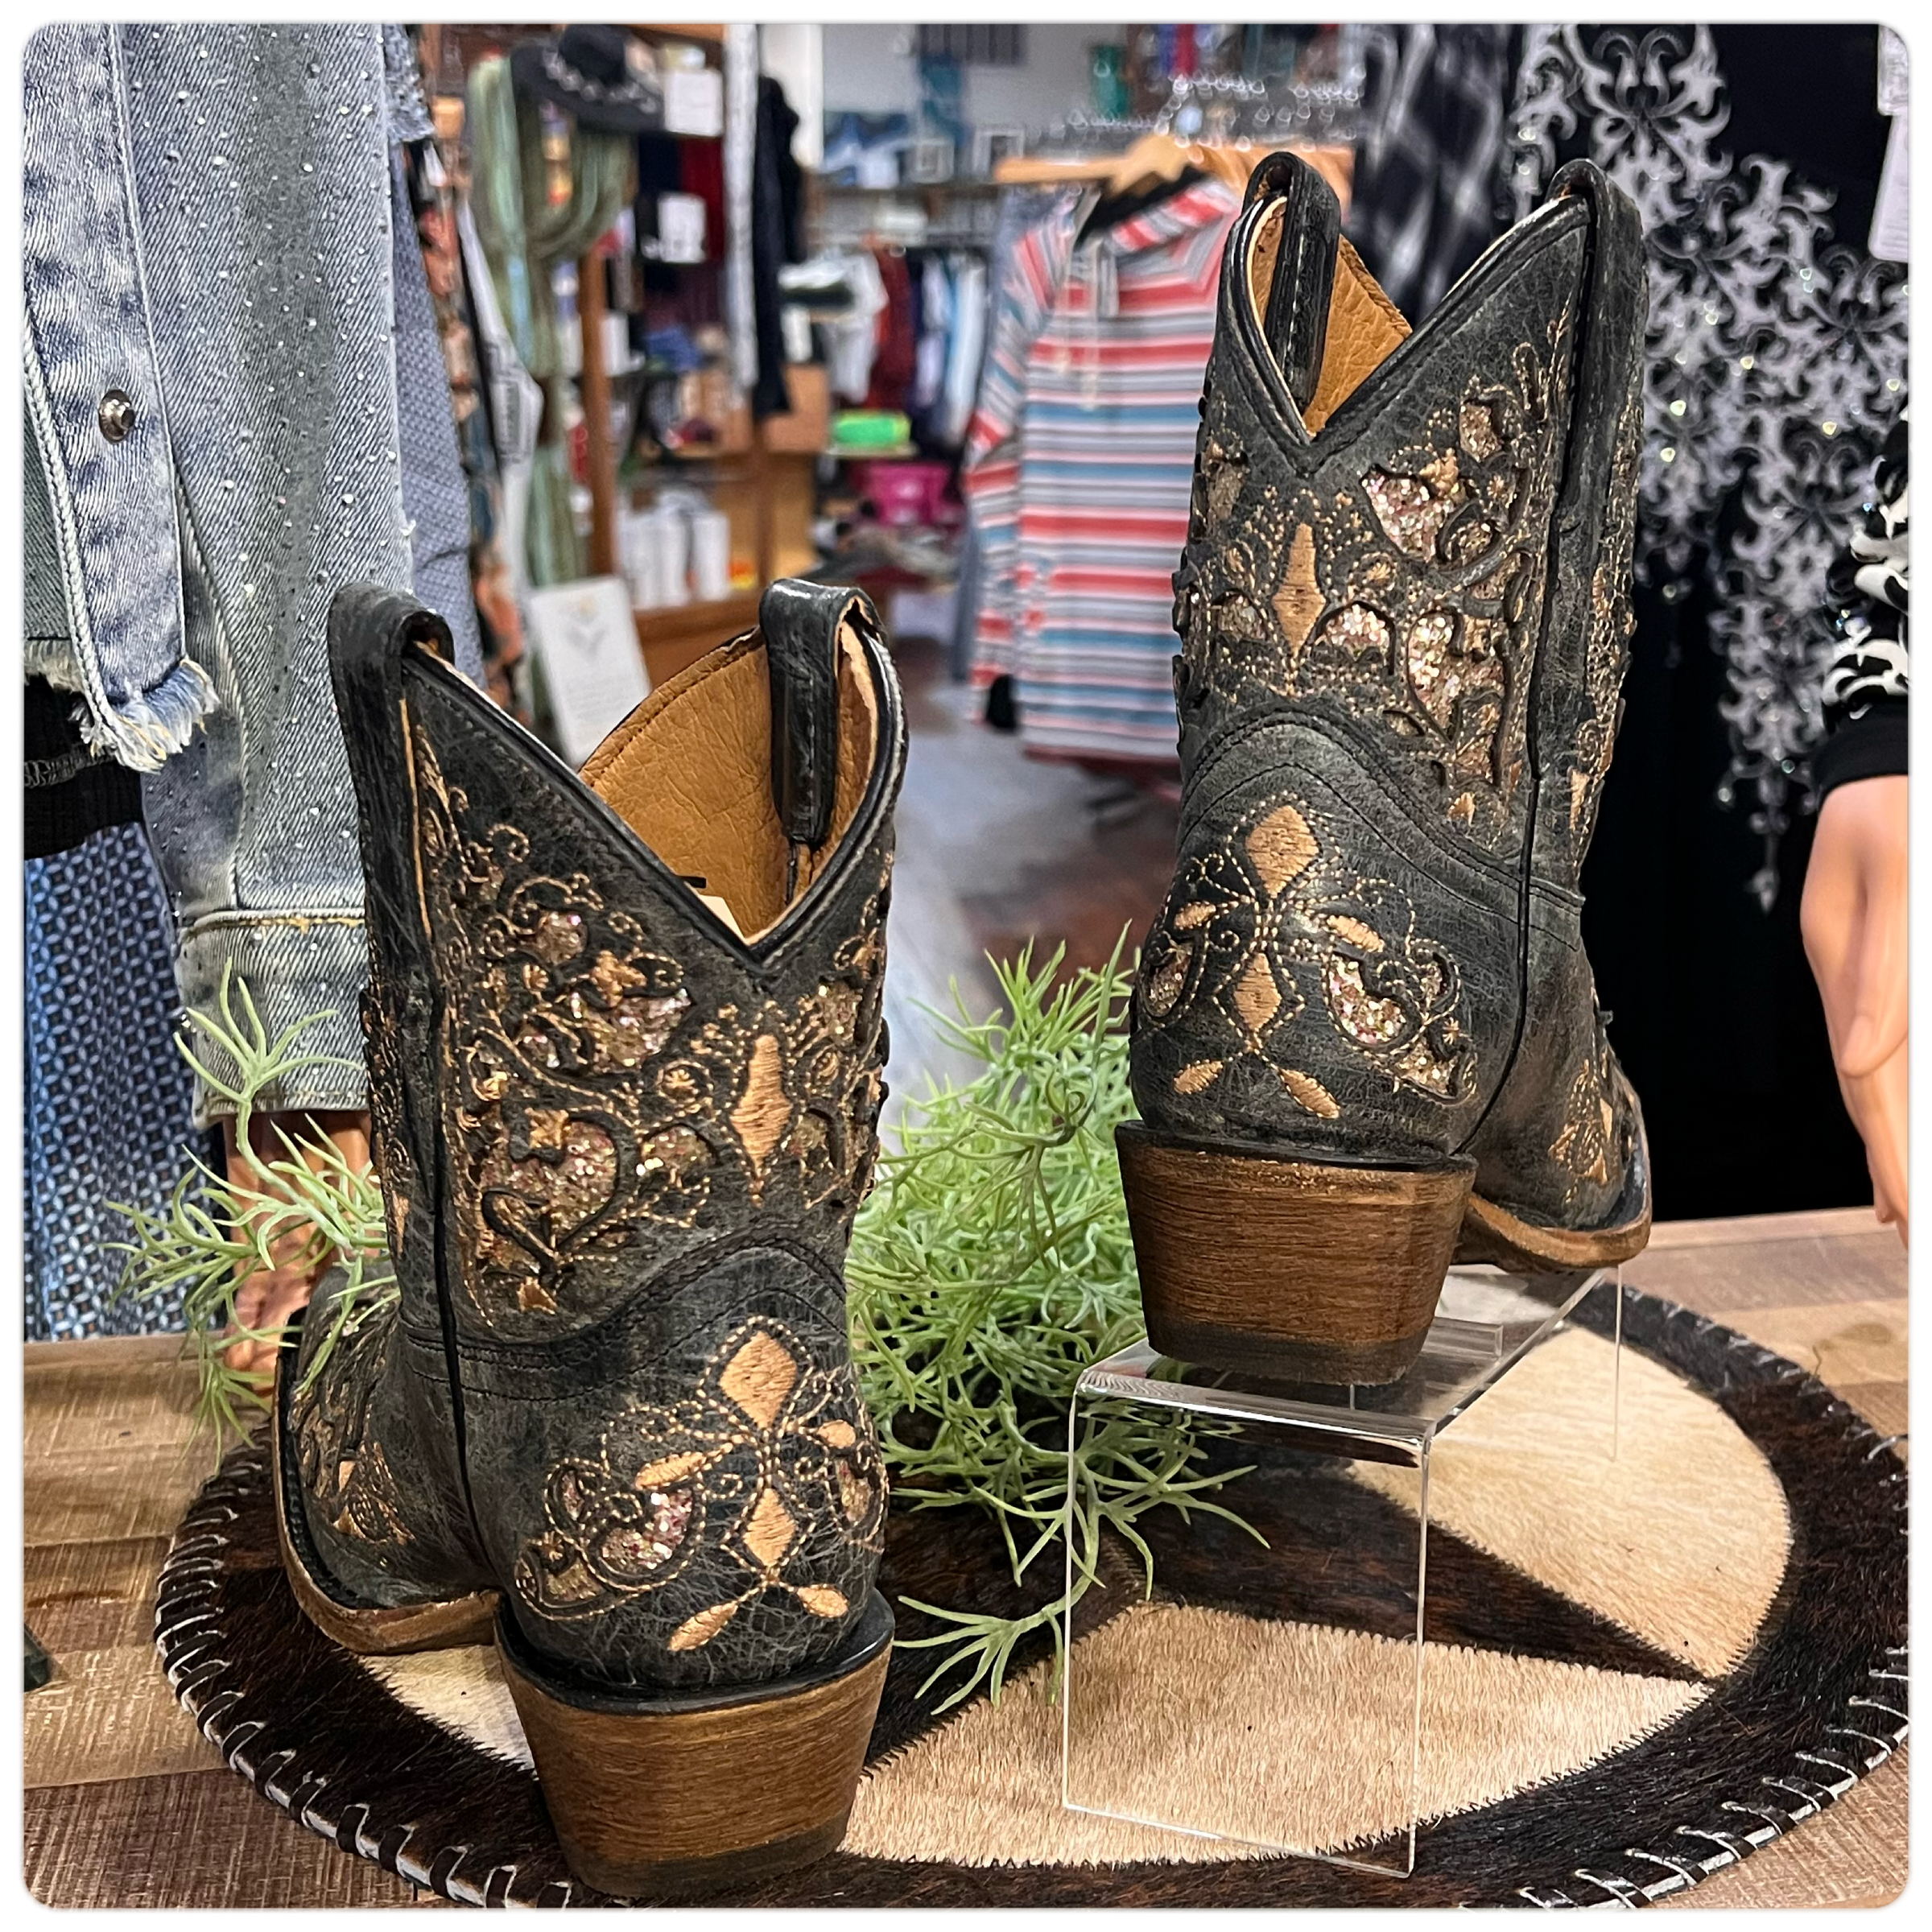 Corral Boots Teen Black Gold Shorty's-Ladies Boot-Corral Boots-Gallop 'n Glitz- Women's Western Wear Boutique, Located in Grants Pass, Oregon